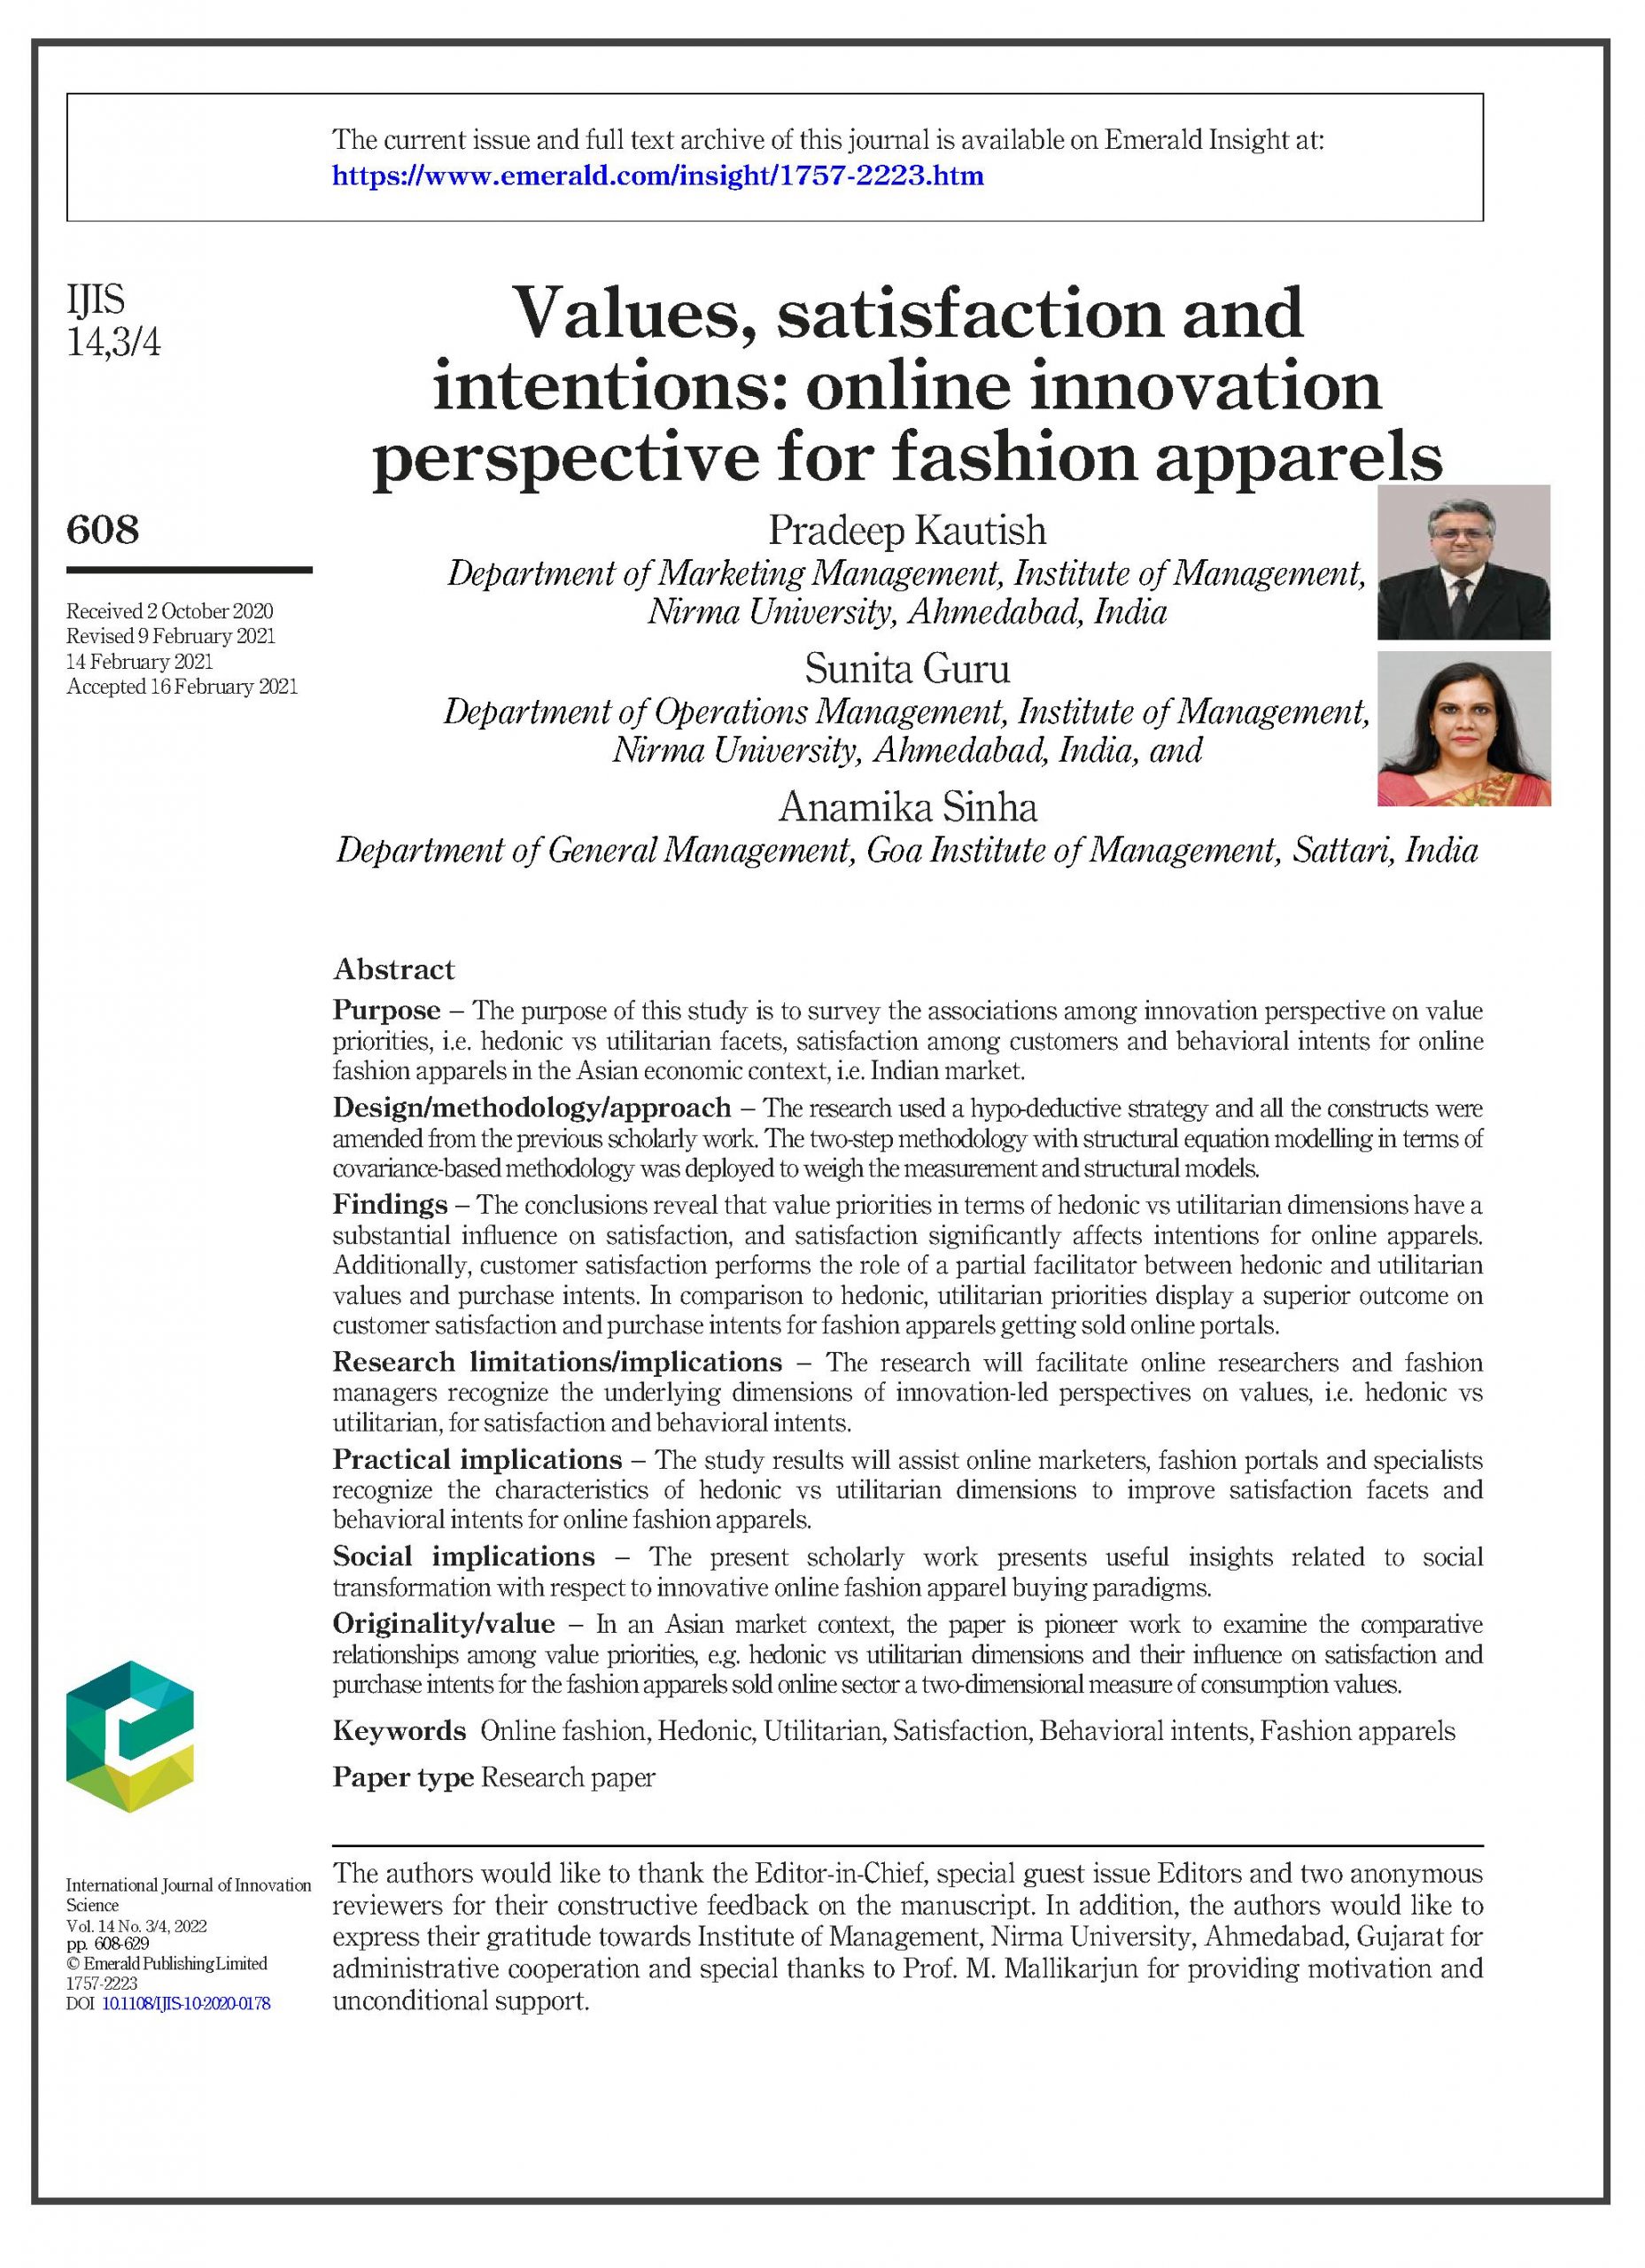 Values, satisfaction and intentions: online innovation perspective for fashion apparels